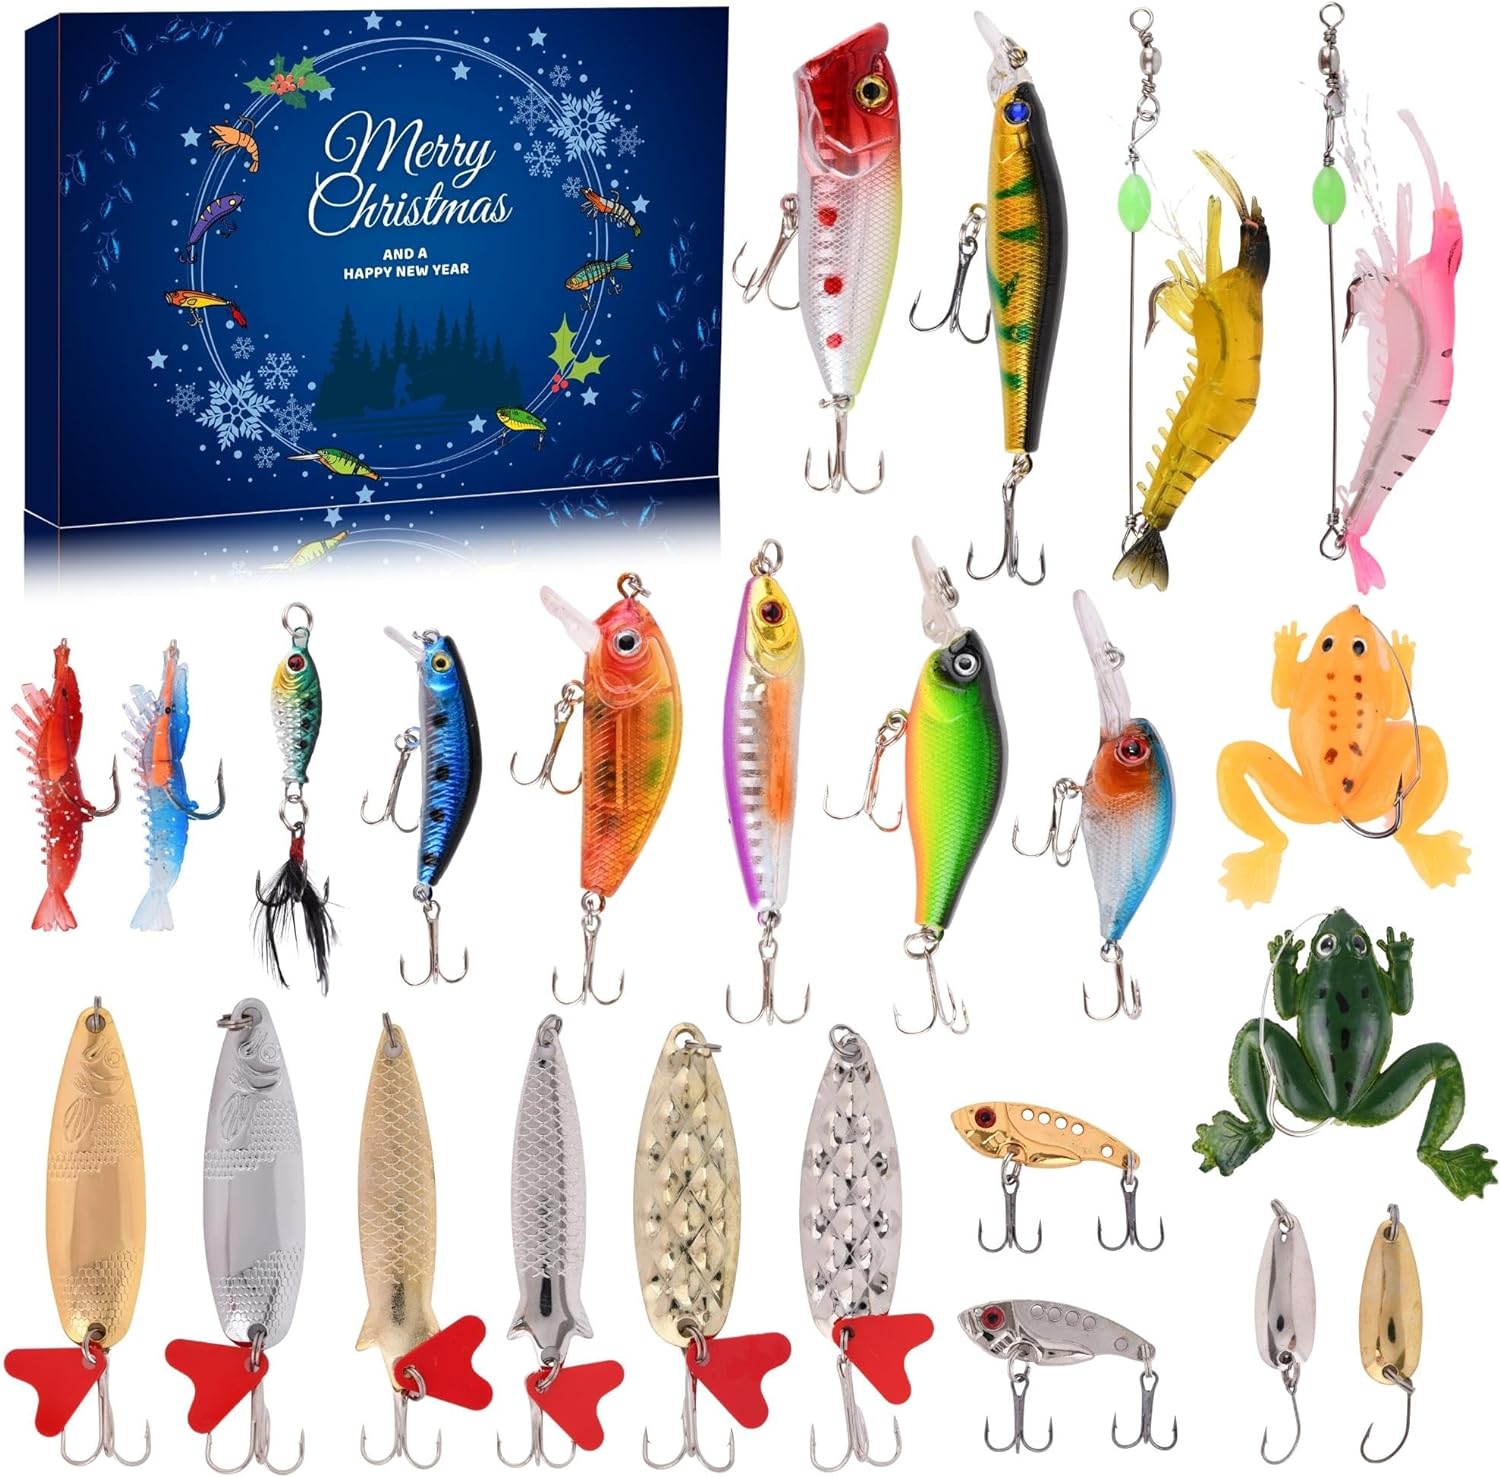 Image depicting an array of 25 colorful fishing lures neatly displayed in the Tackle Box Advent Calendar, with a cheerful 'Merry Christmas' message printed on the box.